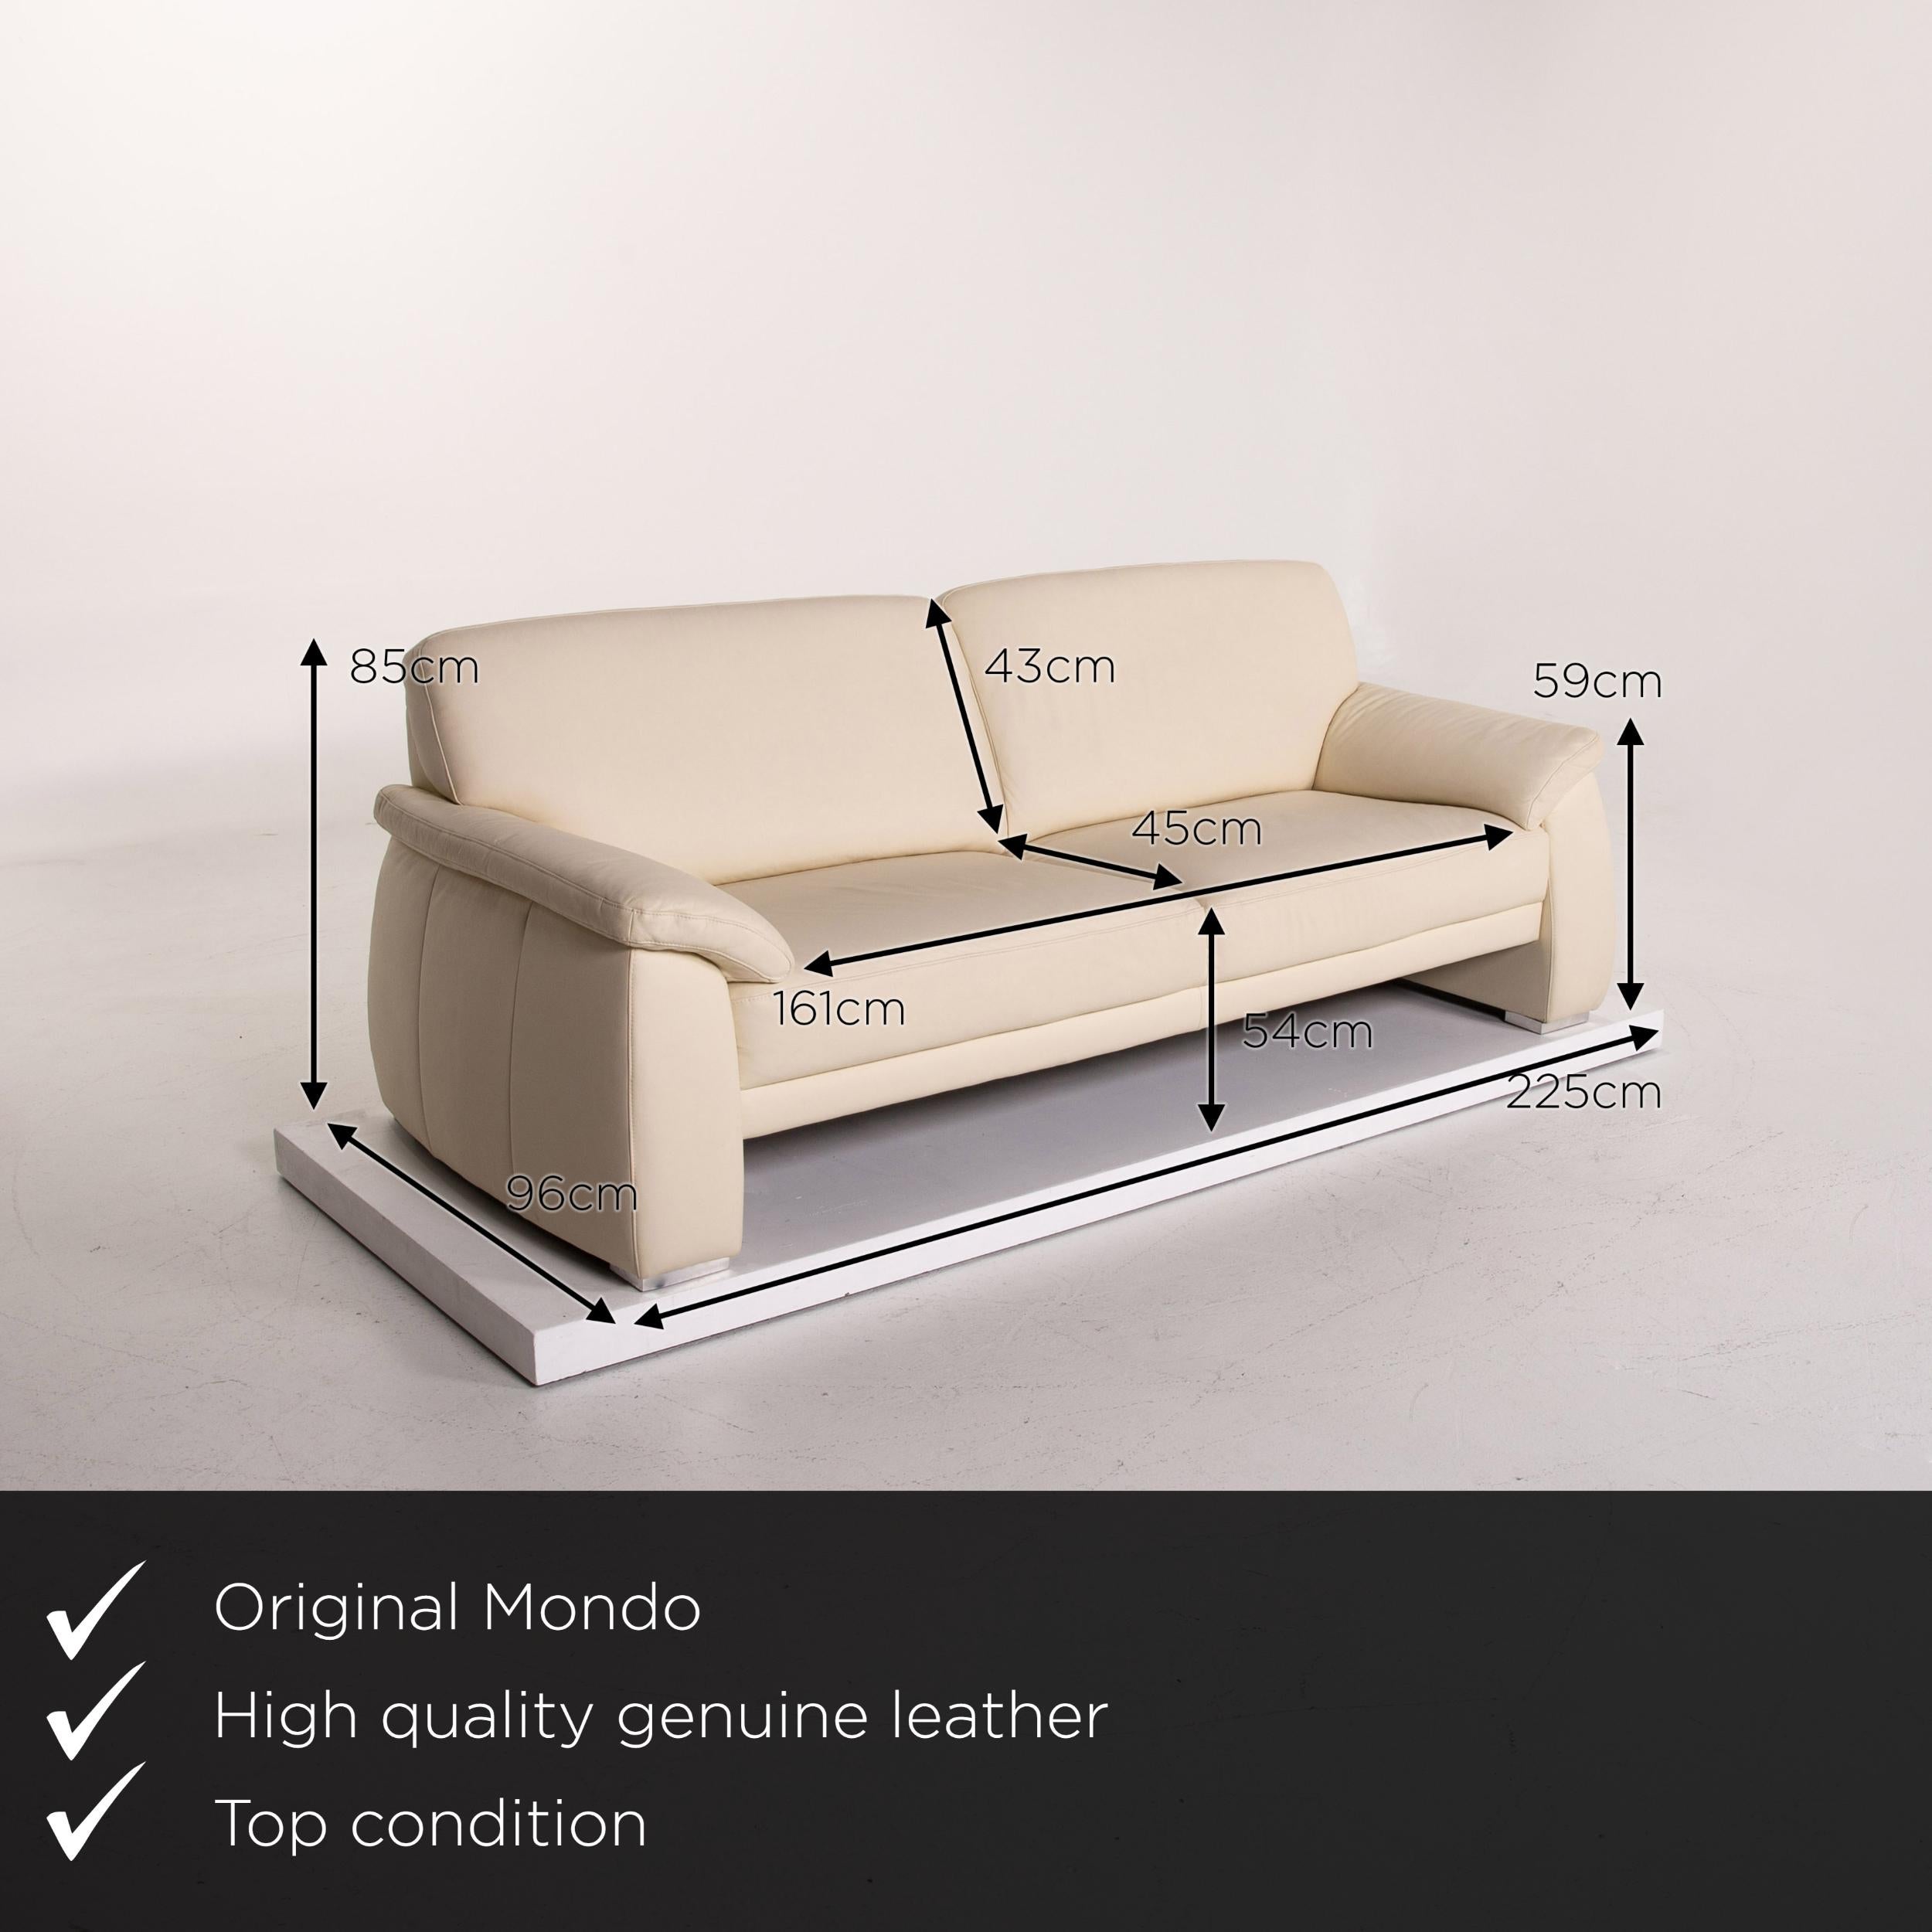 We present to you a Mondo leather sofa cream three-seat couch.
 

 Product Measurements in centimeters:
 

Depth 93
Width 225
Height 85
Seat height 54
Rest height 59
Seat depth 45
Seat width 161
Back height 43.
 